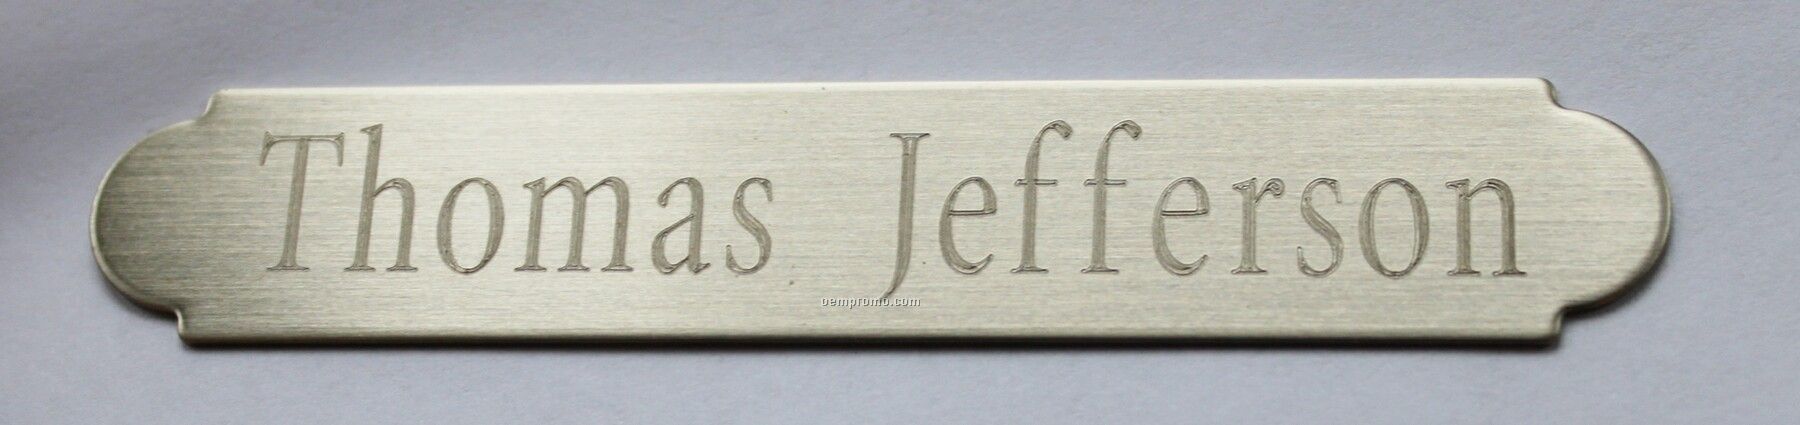 Rotary Engraved Satin Nickel Silver Name Plate (3" W X 5/8" H)